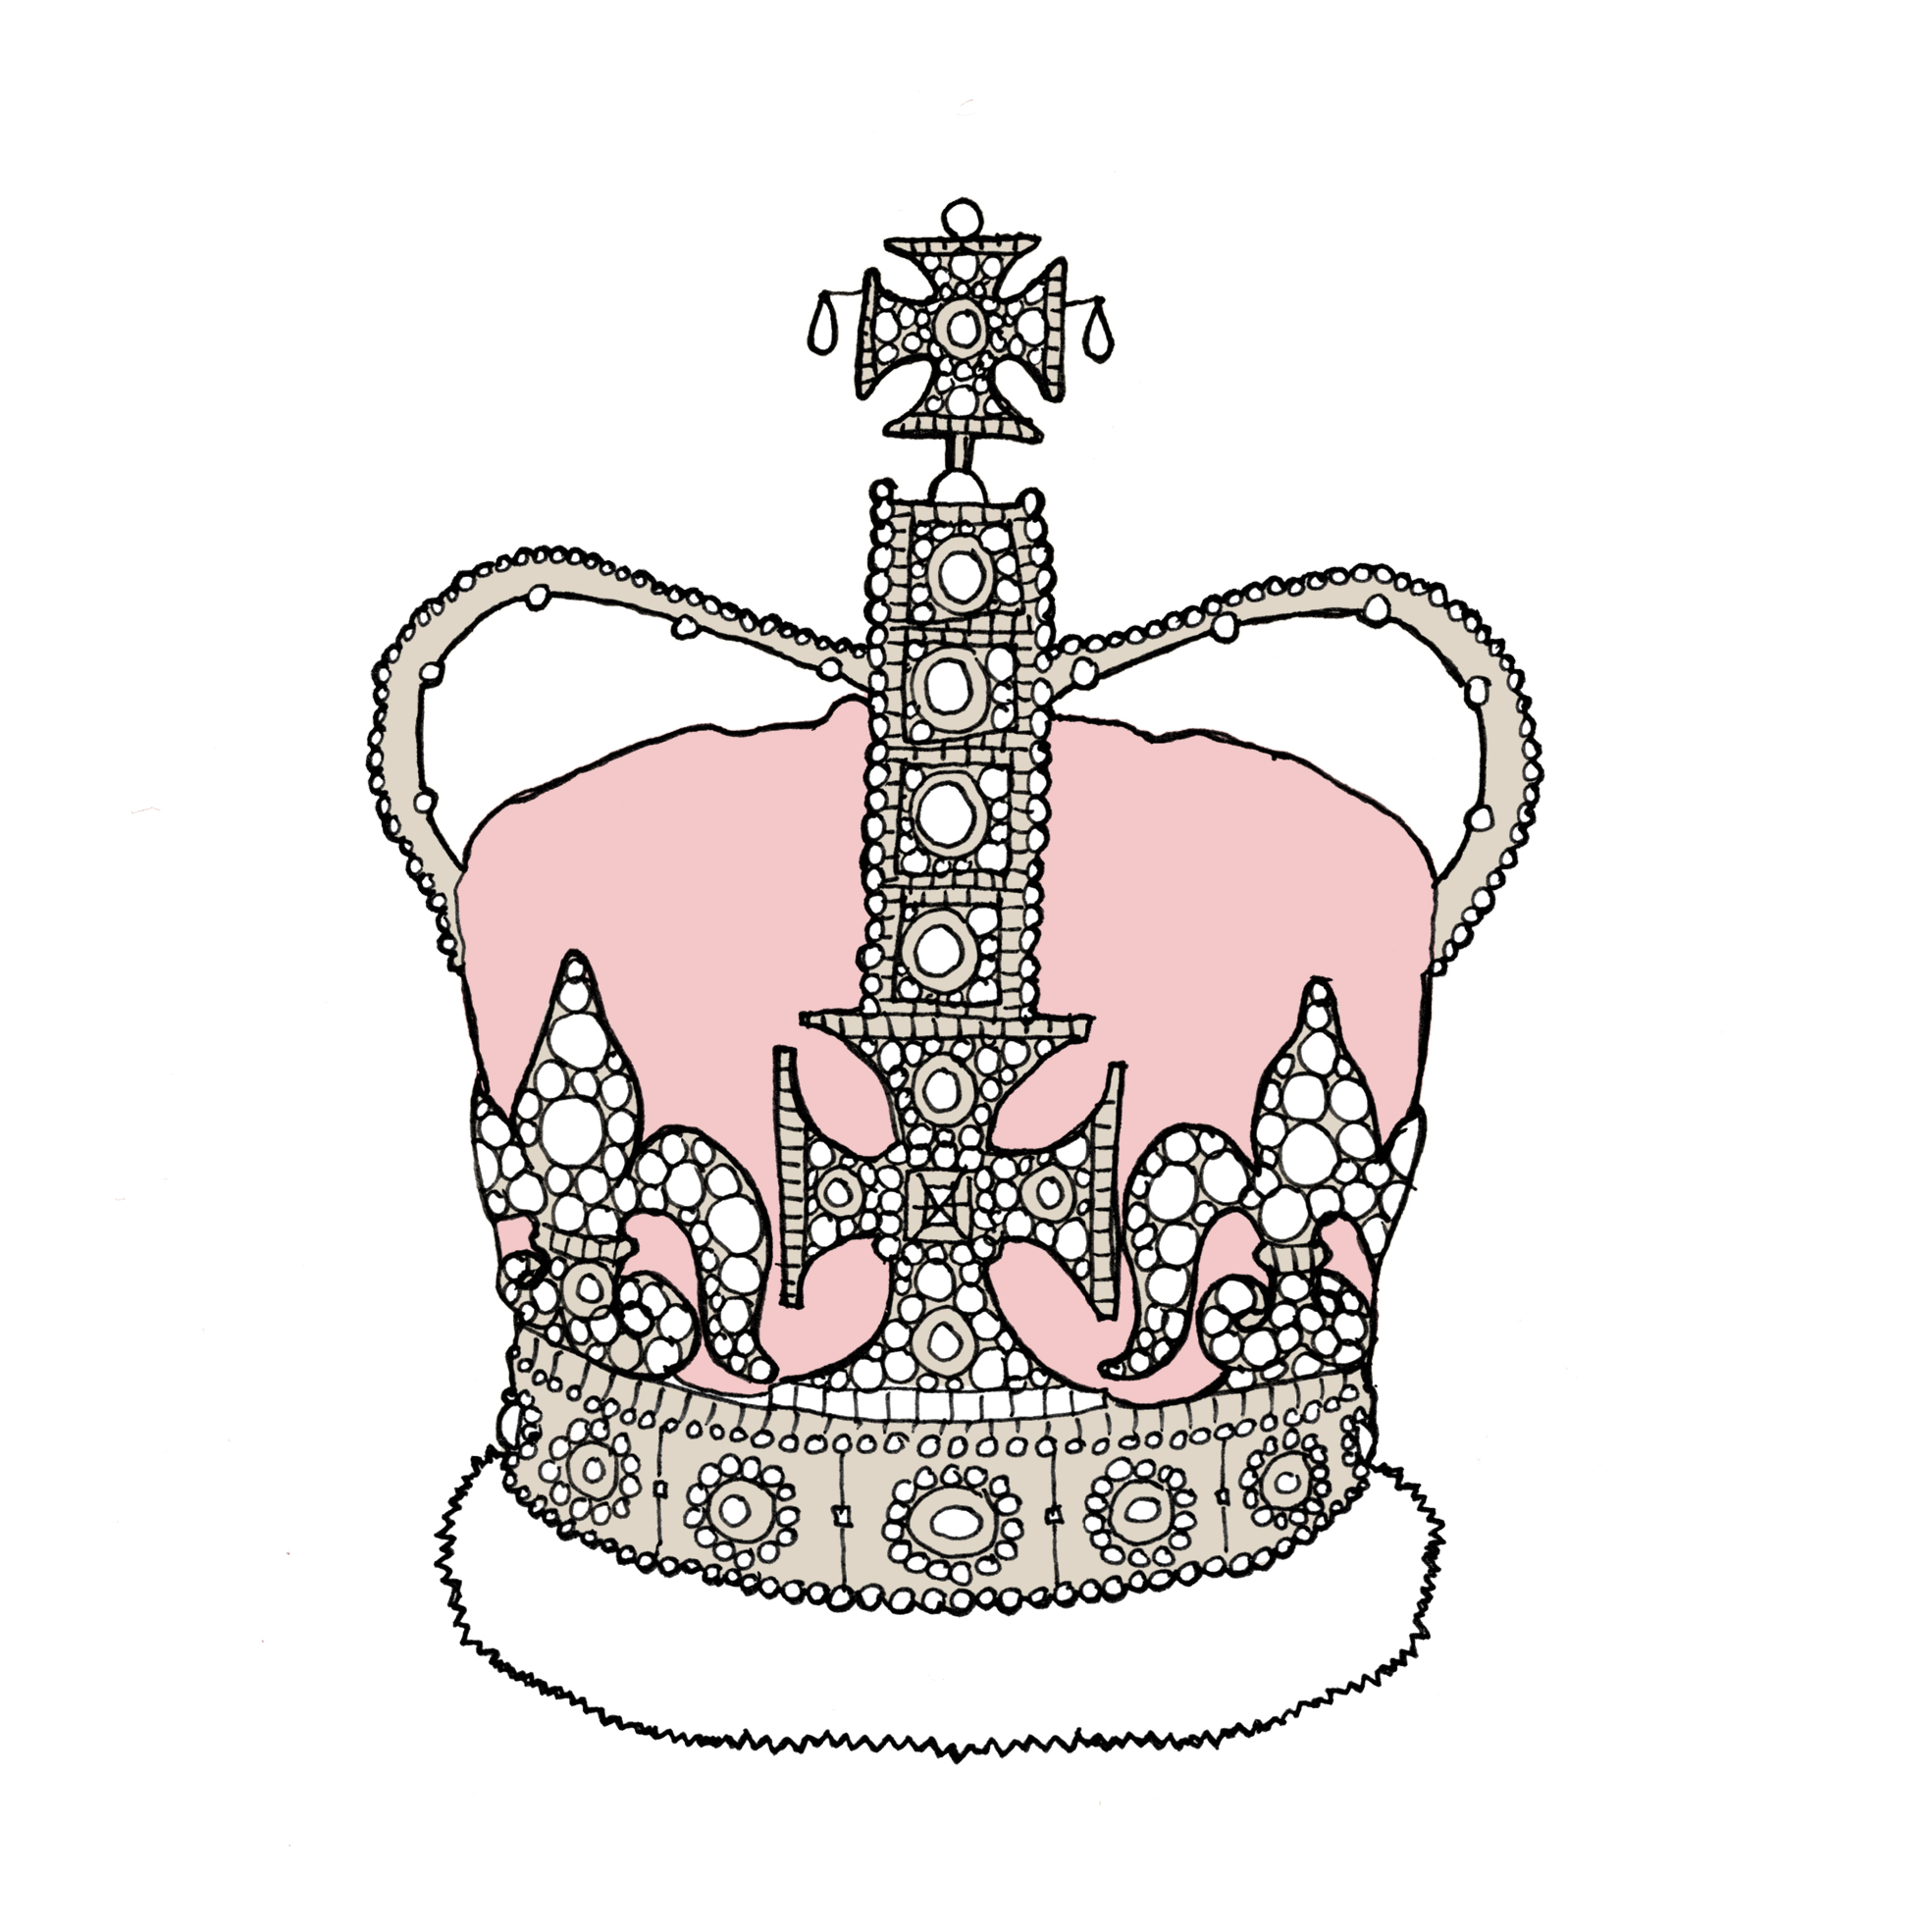 Free Queen Crown Drawing, Download Free Queen Crown Drawing png images